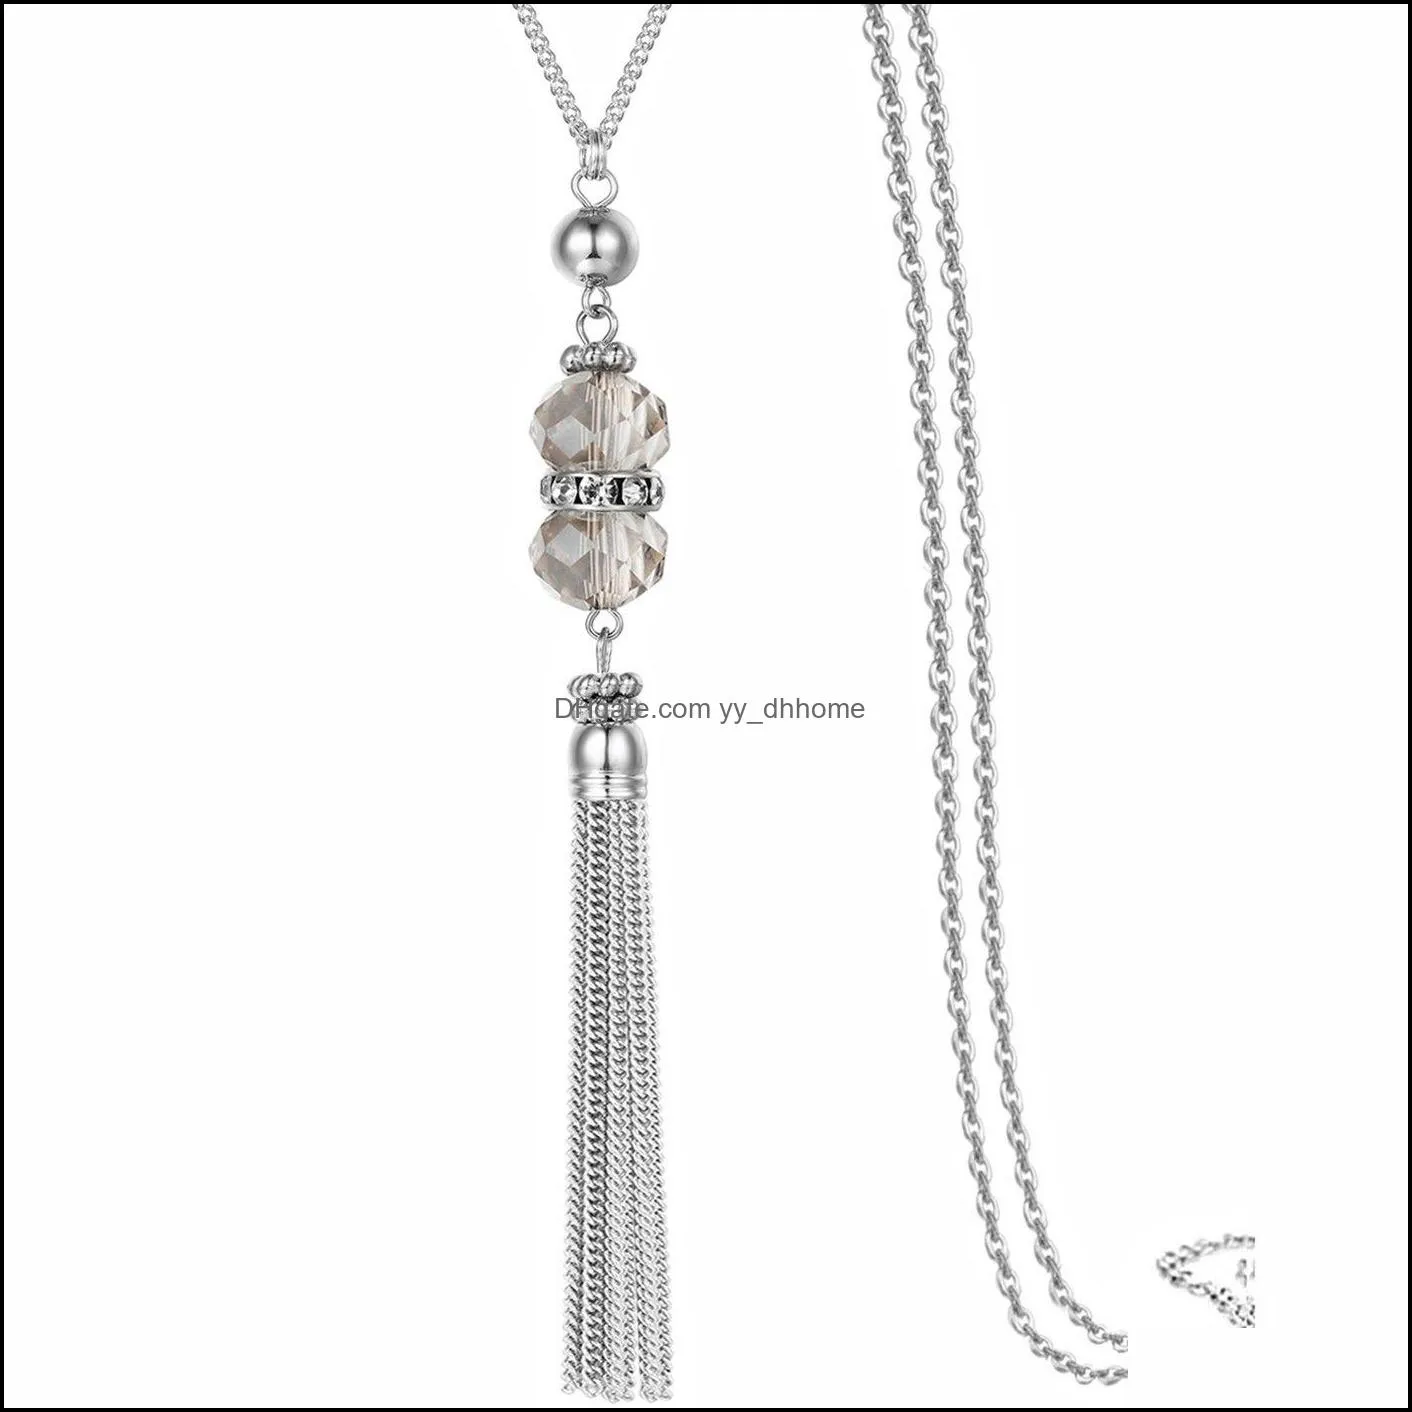 New Crystal Bead Sweater Chain Necklace for Women Fashion Silver Color Tassel Pendant Long Statement Necklaces Jewelry